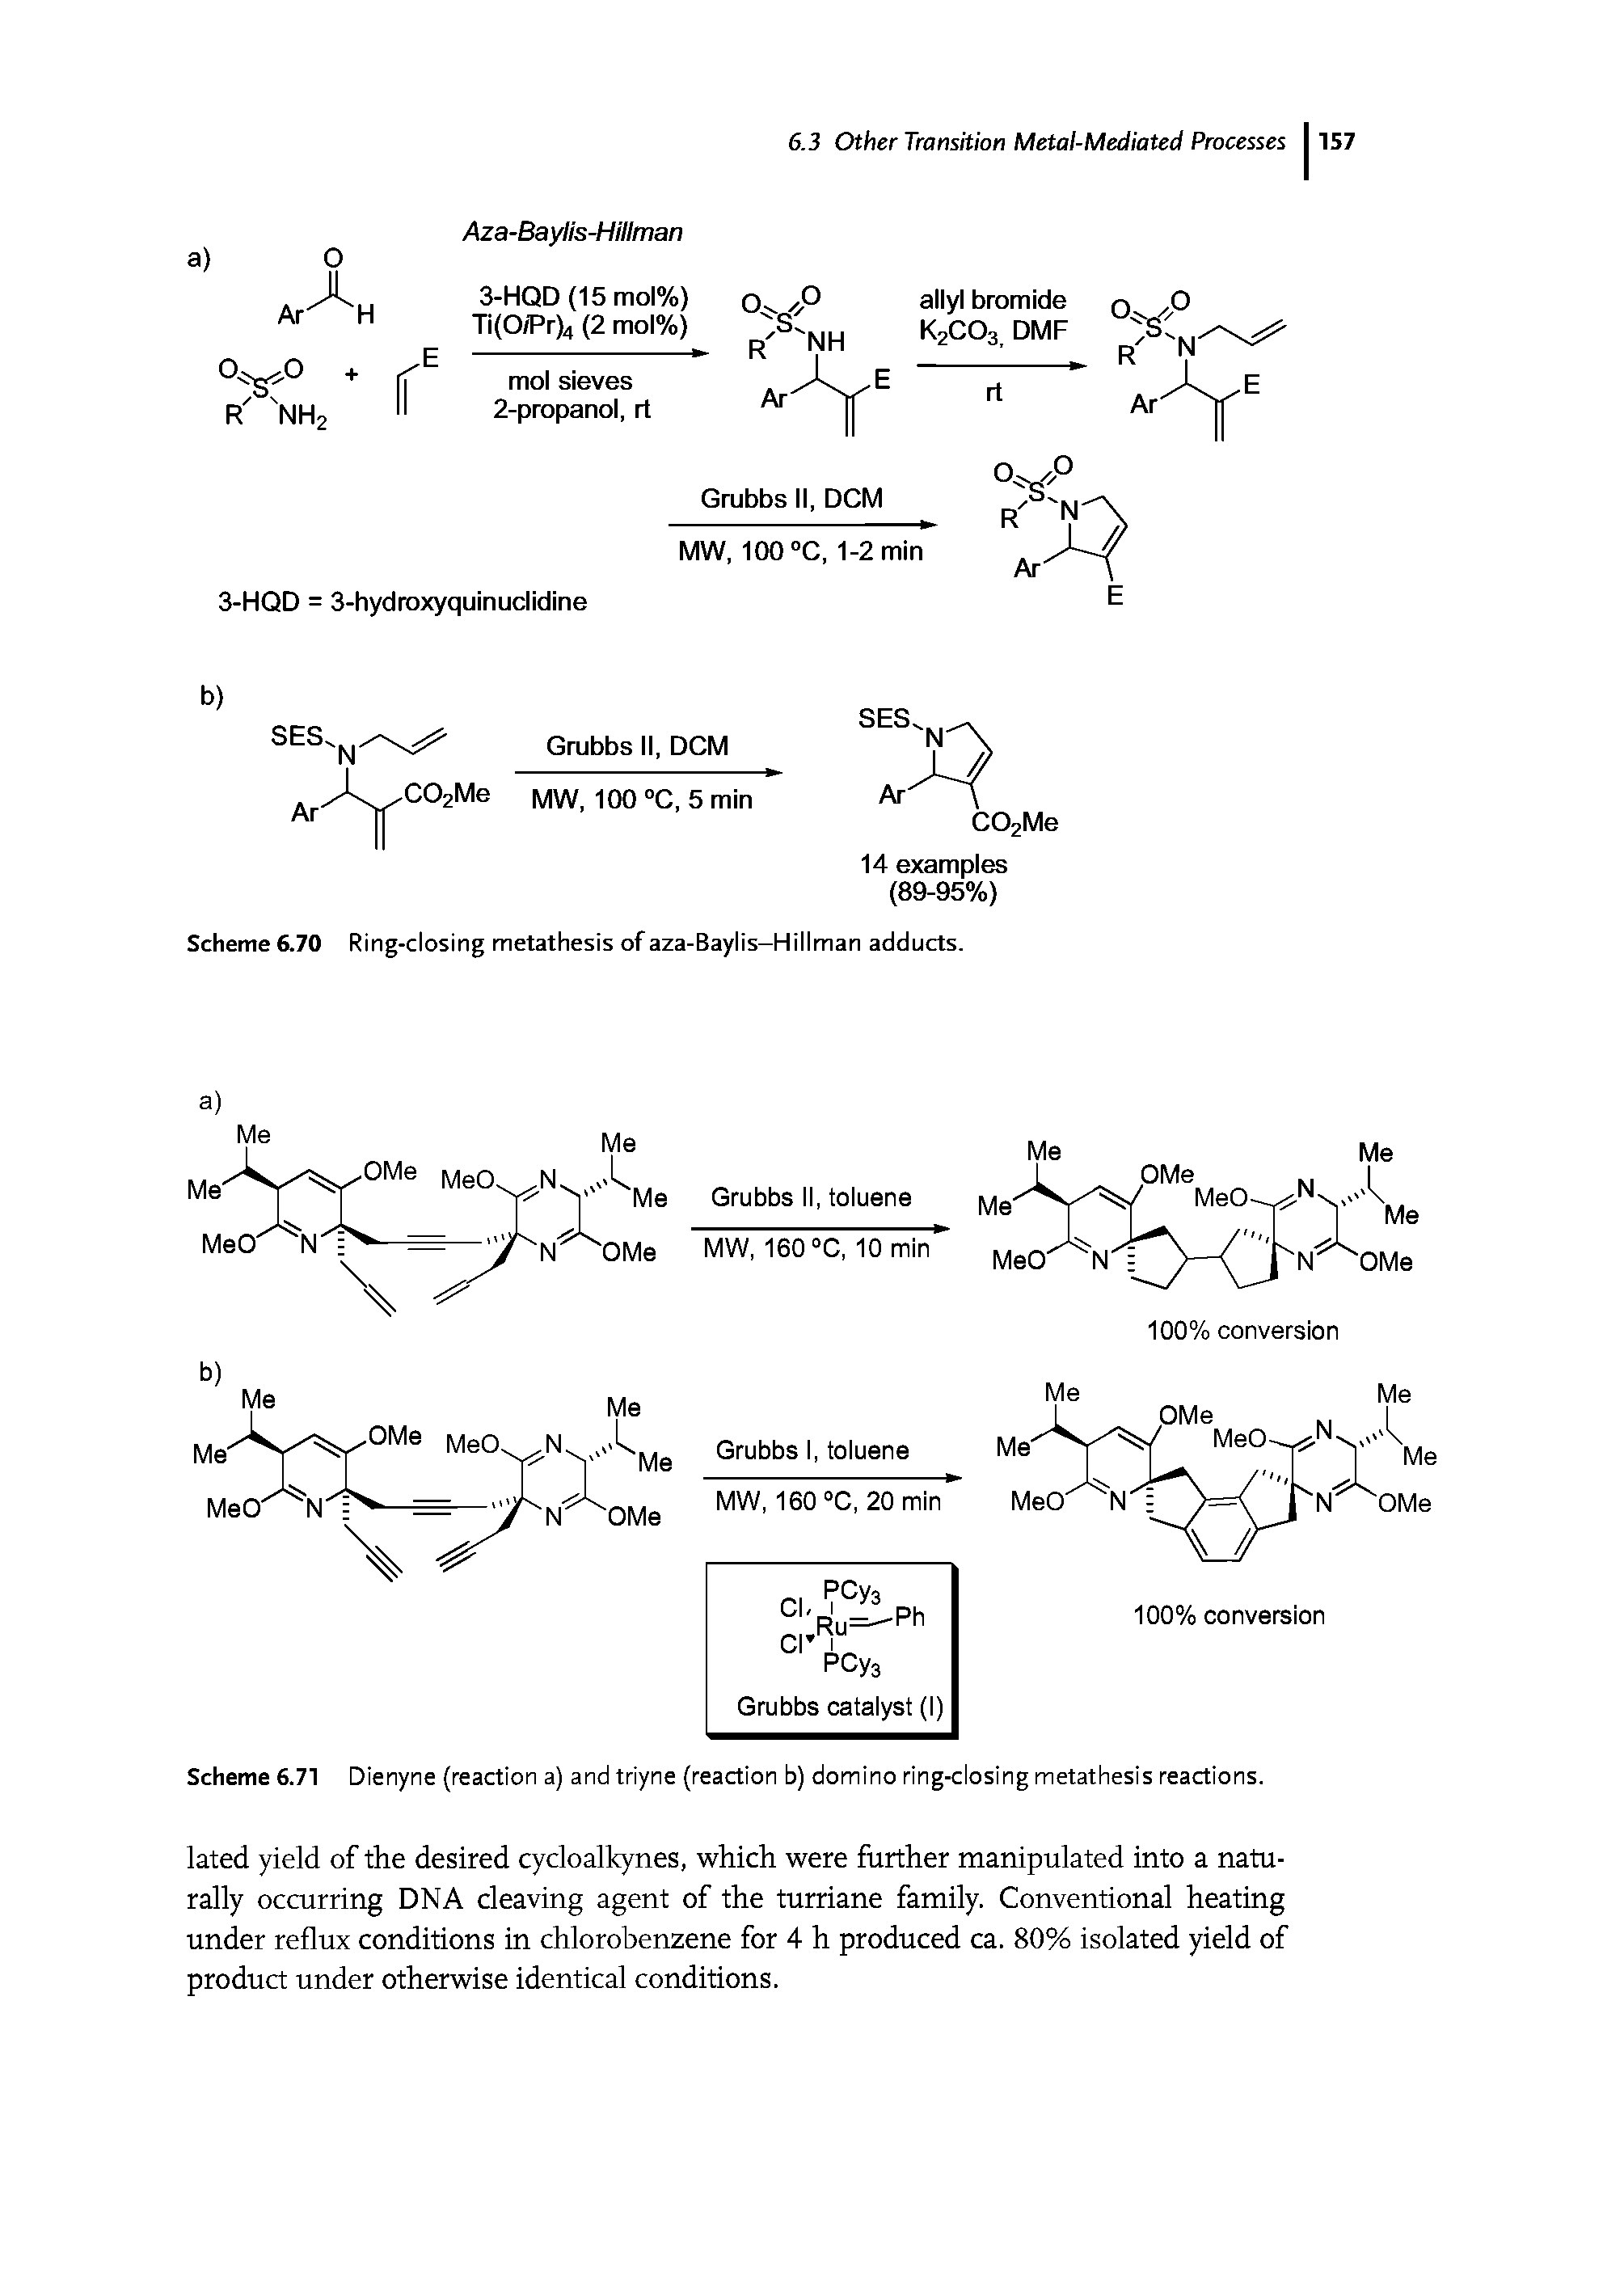 Scheme 6.71 Dienyne (reaction a) and triyne (reaction b) domino ring-closing metathesis reactions.